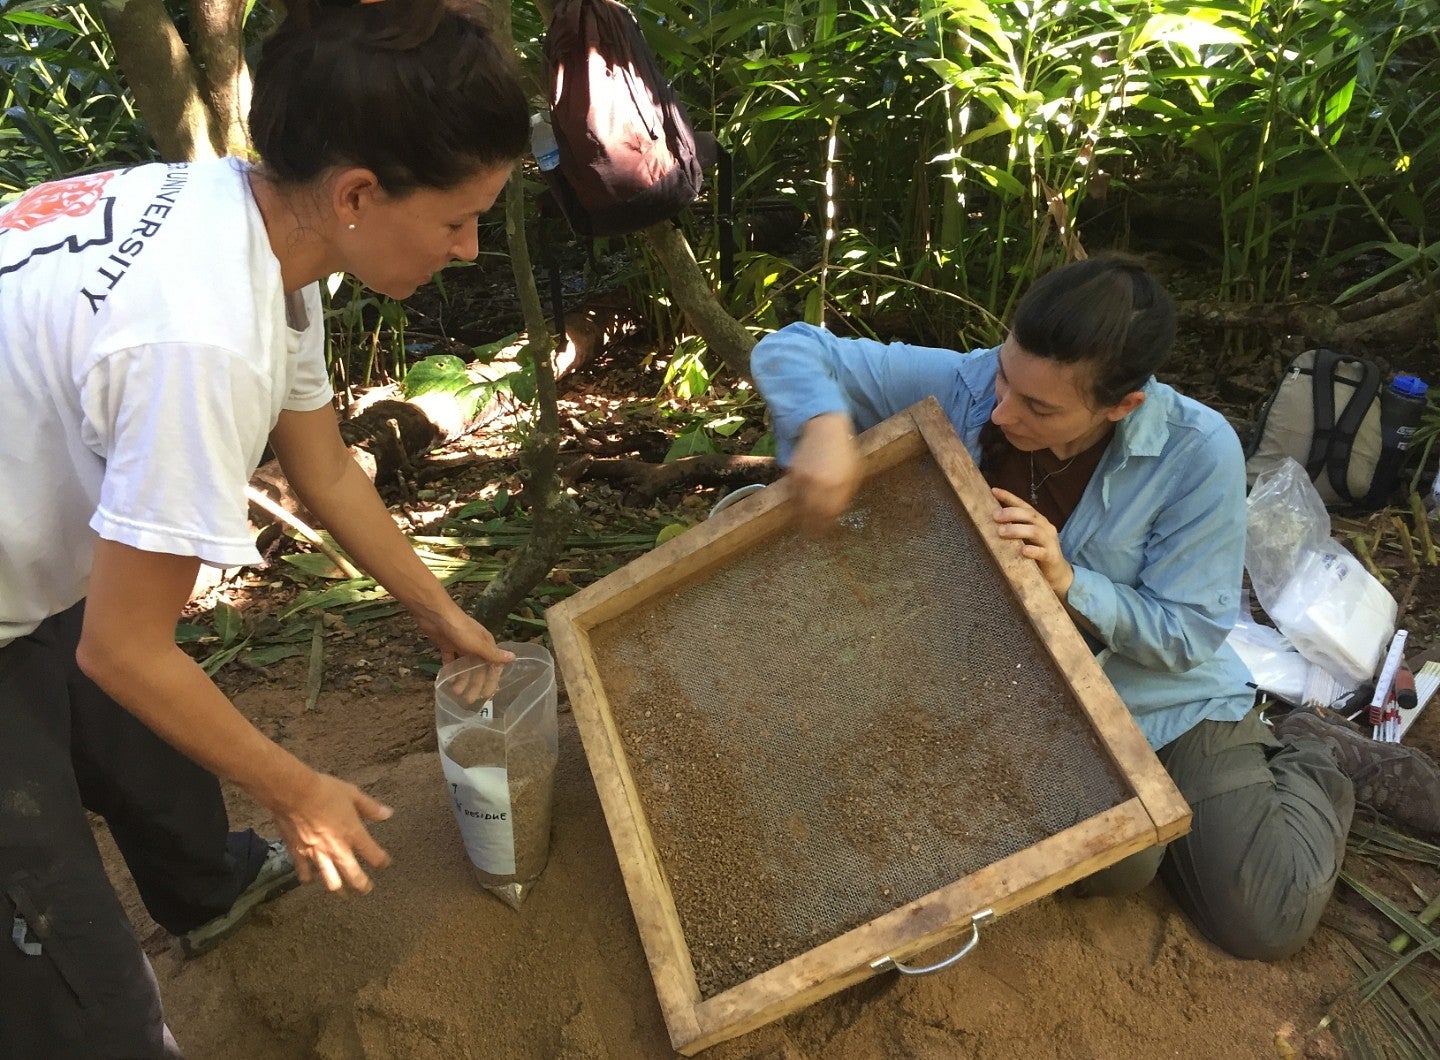 Researchers sifting dirt through screen in tropical grove